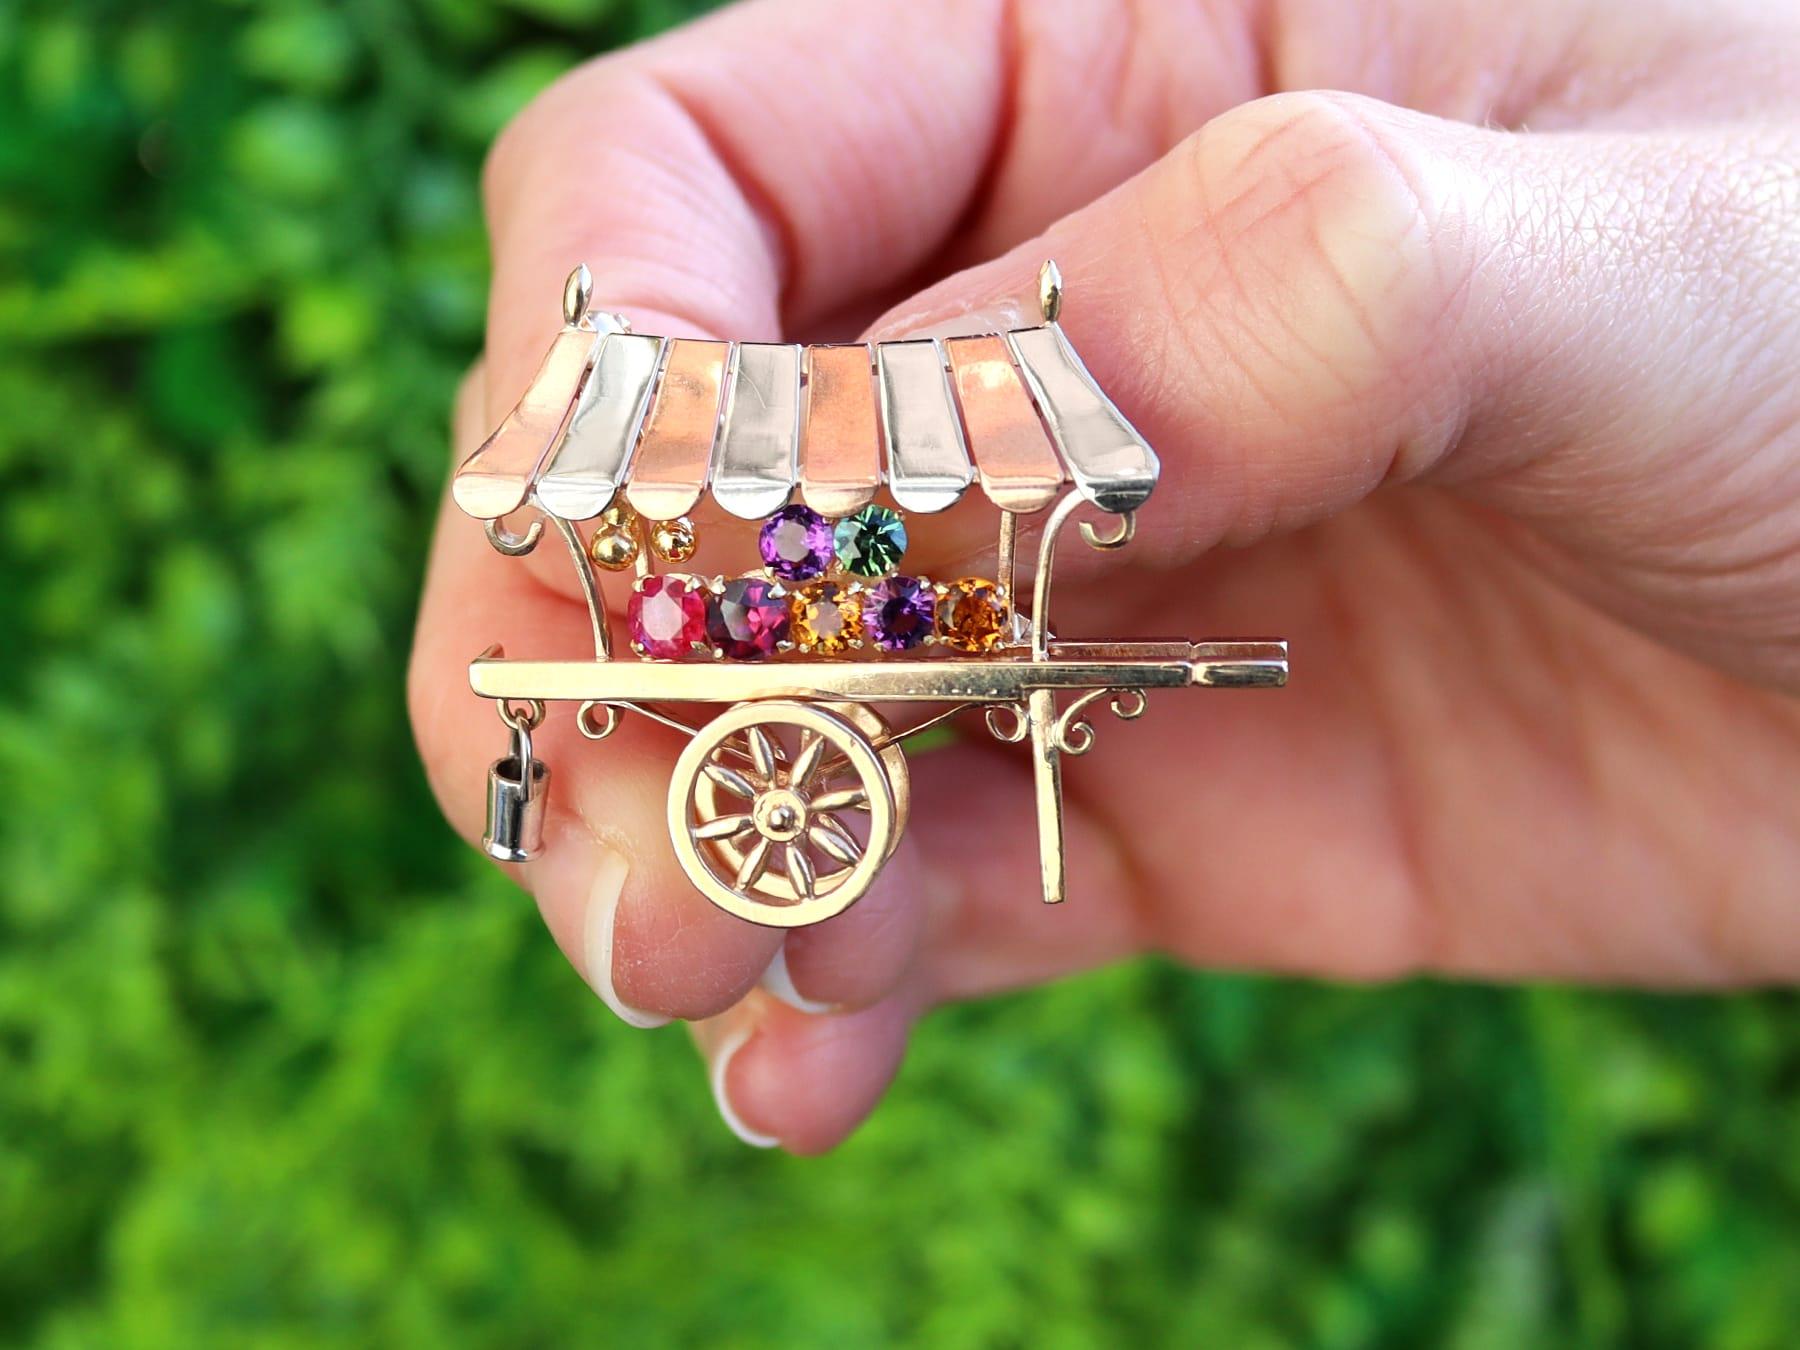 A fine and impressive vintage 0.85 carat citrine, amethyst, tourmaline, ruby and 9 karat gold 'cart' brooch by Alabaster & Wilson; part of our diverse vintage jewelry and estate jewelry collections

This fine and impressive vintage cart brooch has